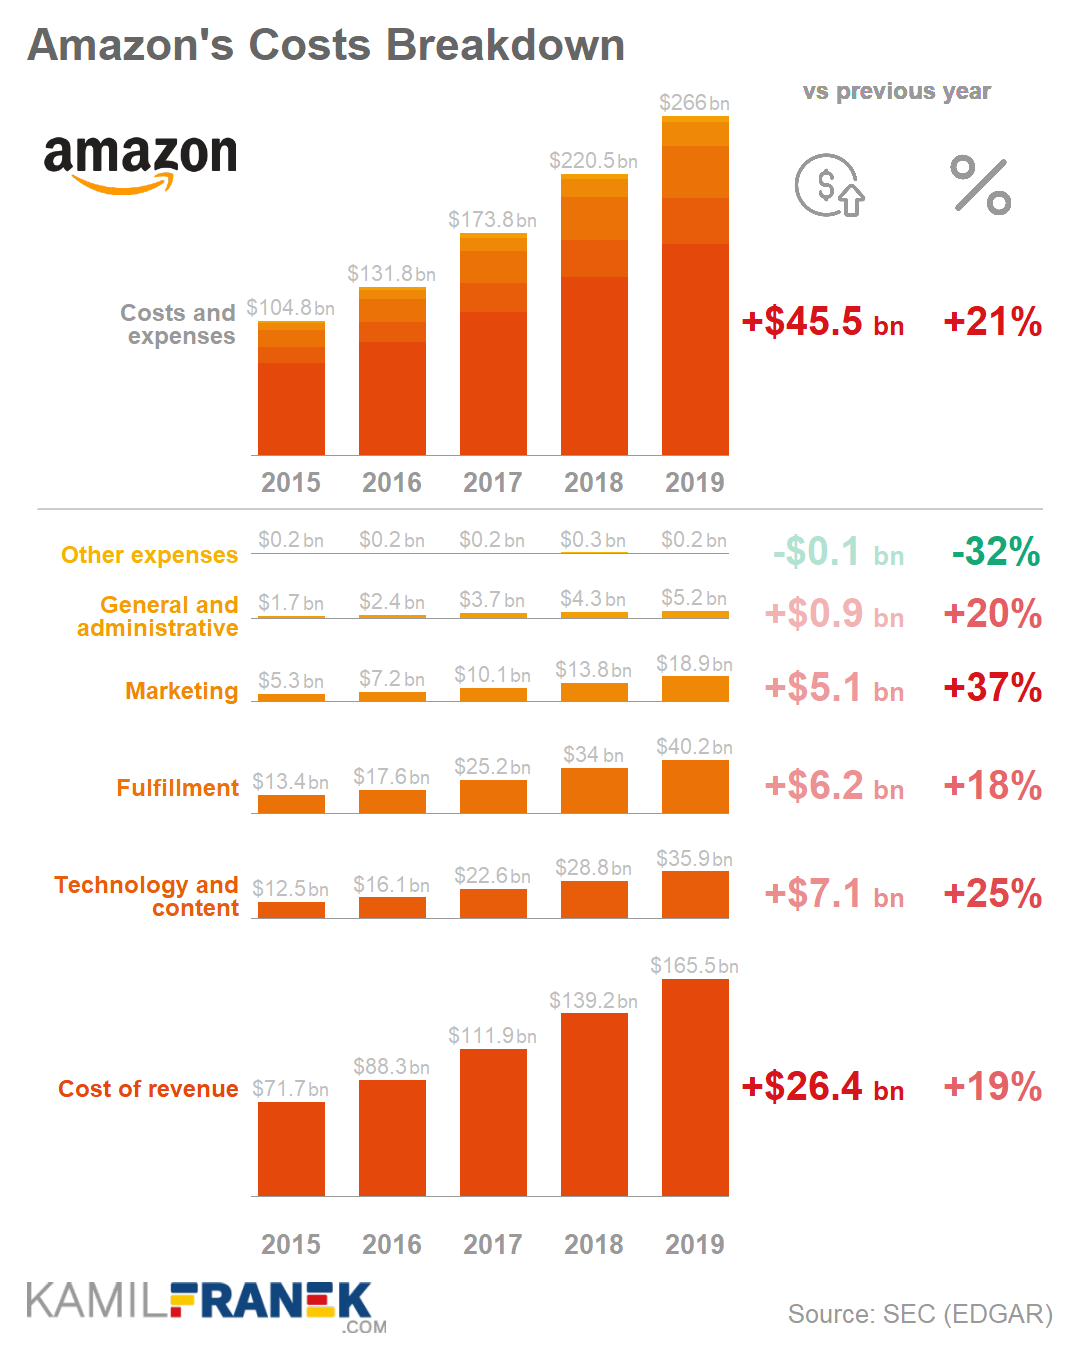 Chart of Amazon's costs and expenses breakdown (2015 to 2019)